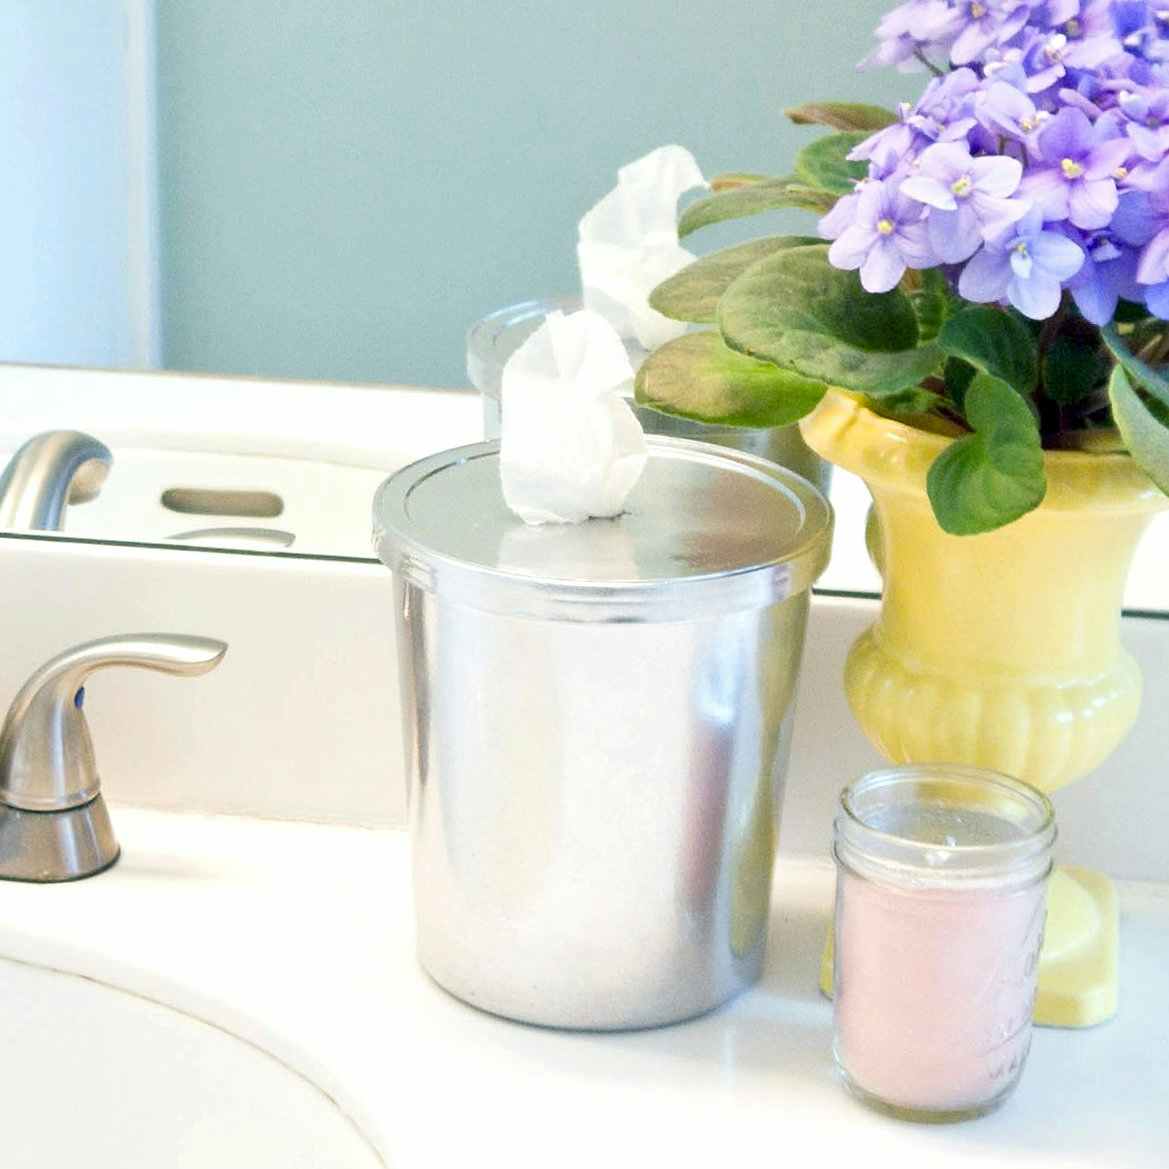 Make bathroom-cleaning wipes out of rubbing alcohol, lemon juice, and vinegar.